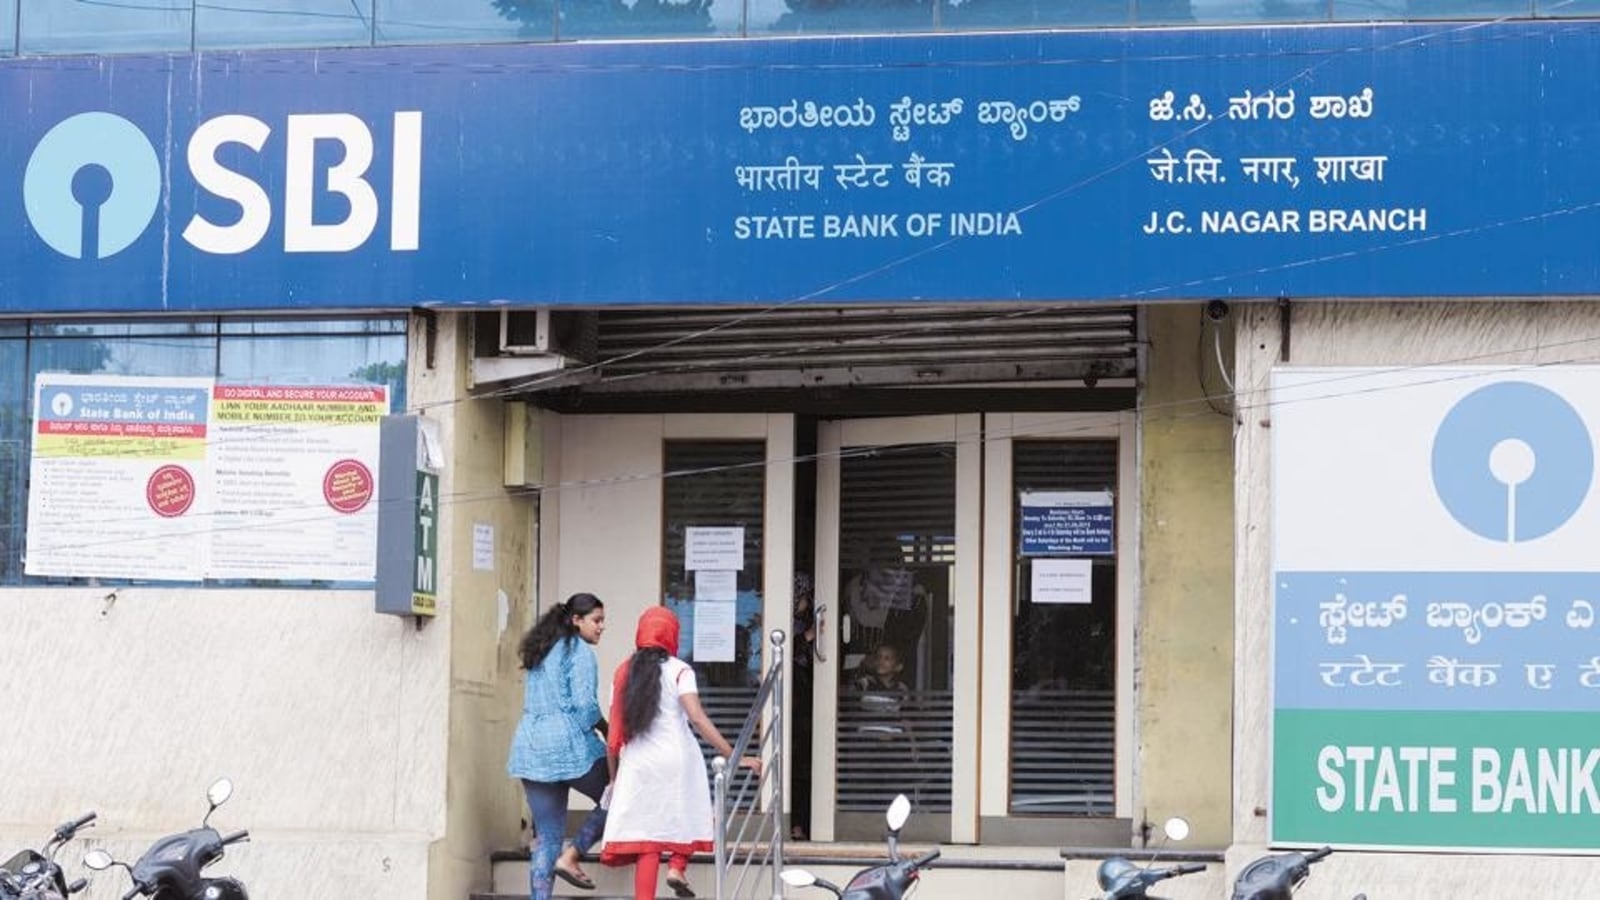 Sbi Online Banking Service To Be Impacted For 120 Minutes On September 15 Hindustan Times 6123